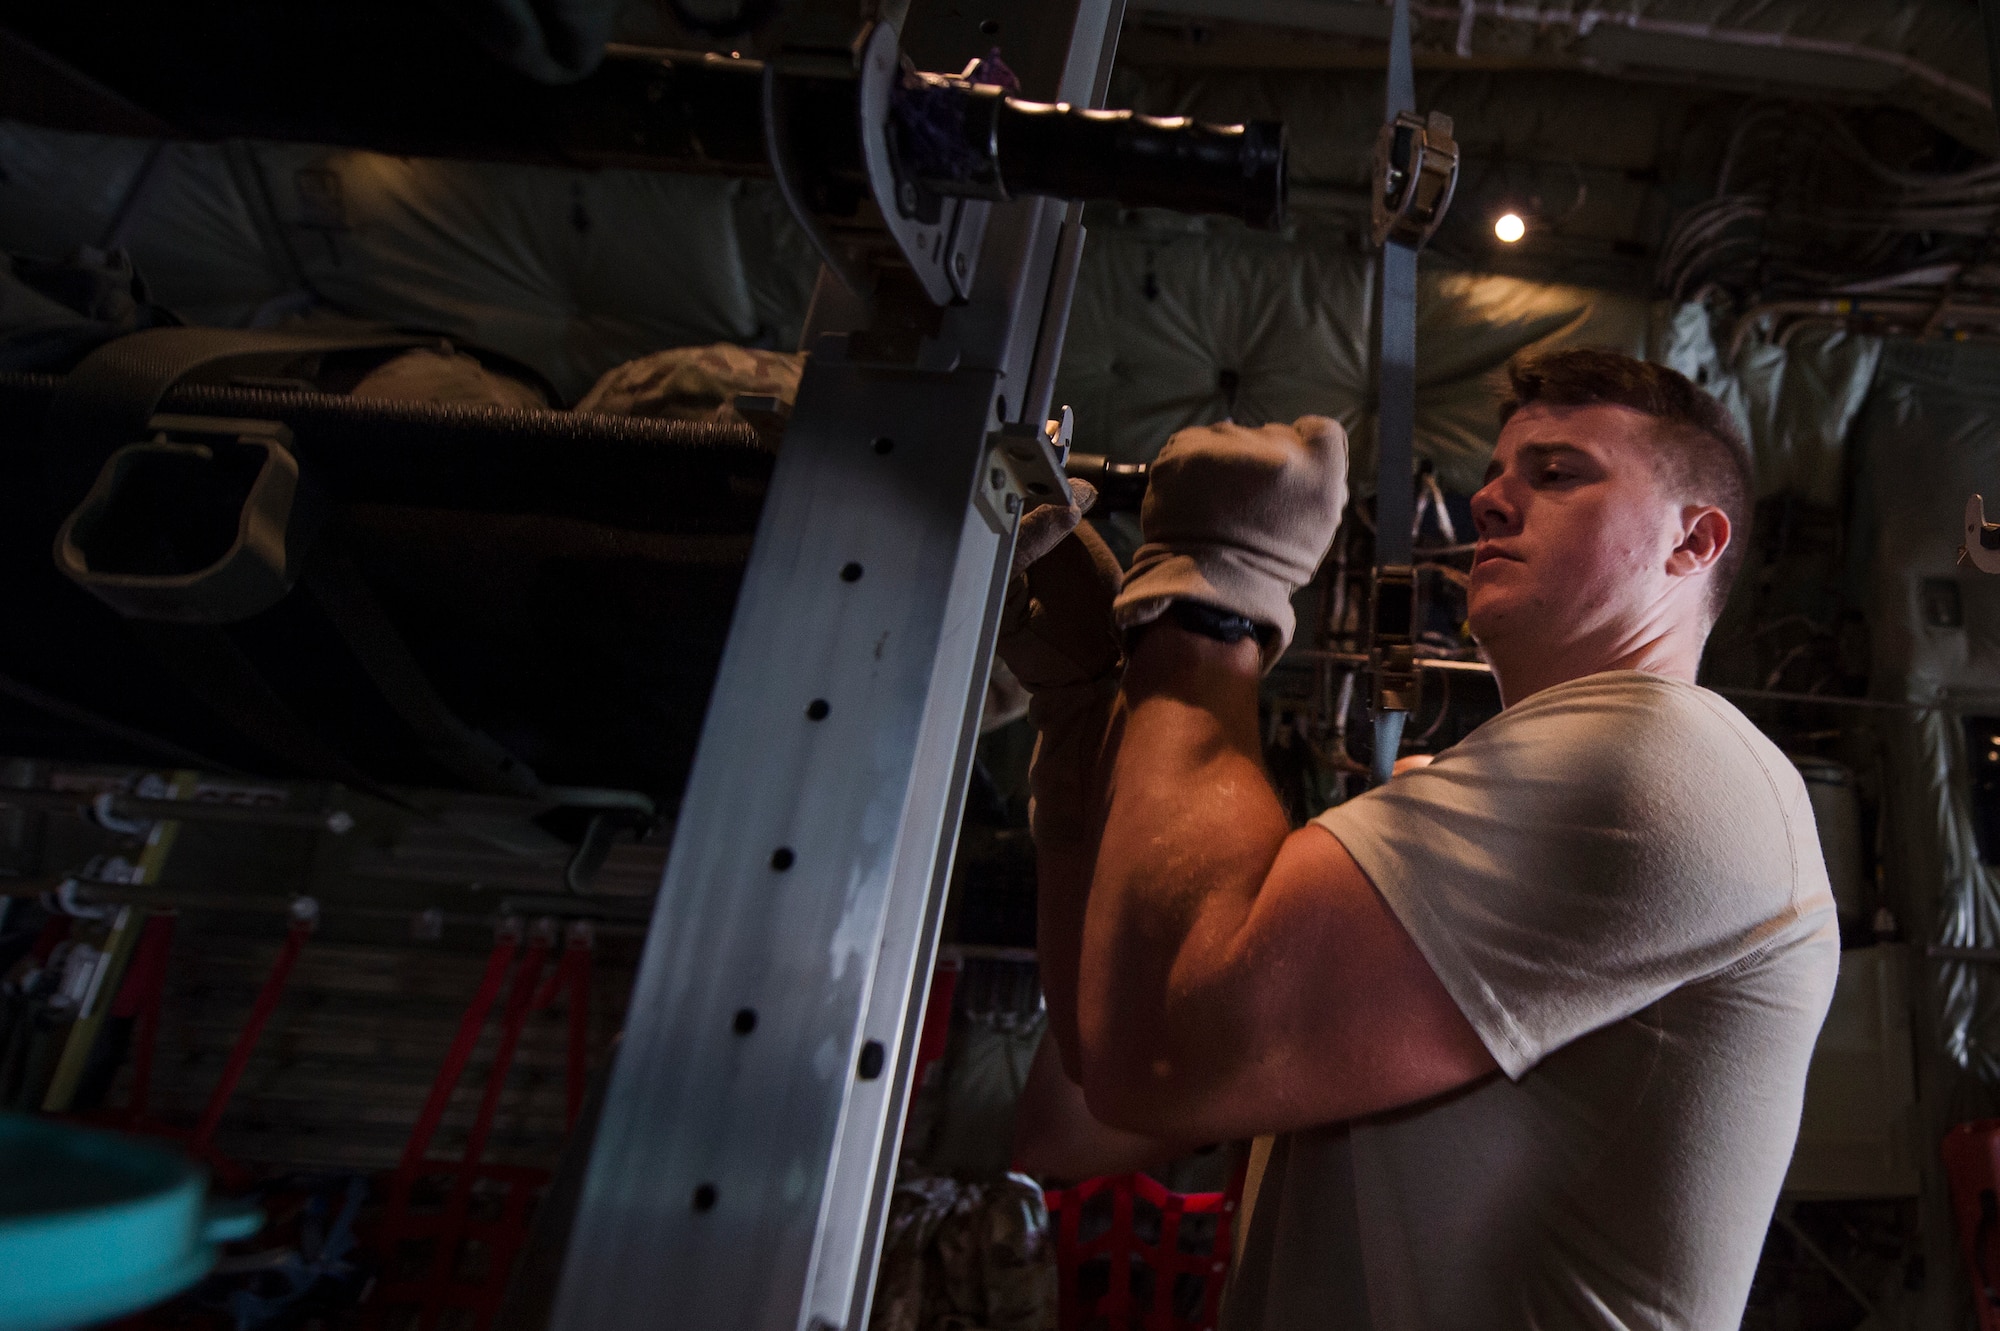 Senior Airman Robert McCabe, left, 379th Expeditionary Aeromedical Evacuation Squadron (EAES) aeromedical evacuation technician, fastens a litter to the inside of a C-130 Hercules at Al Udeid Air Base, Qatar, before a recent aeromedical evacuation mission.